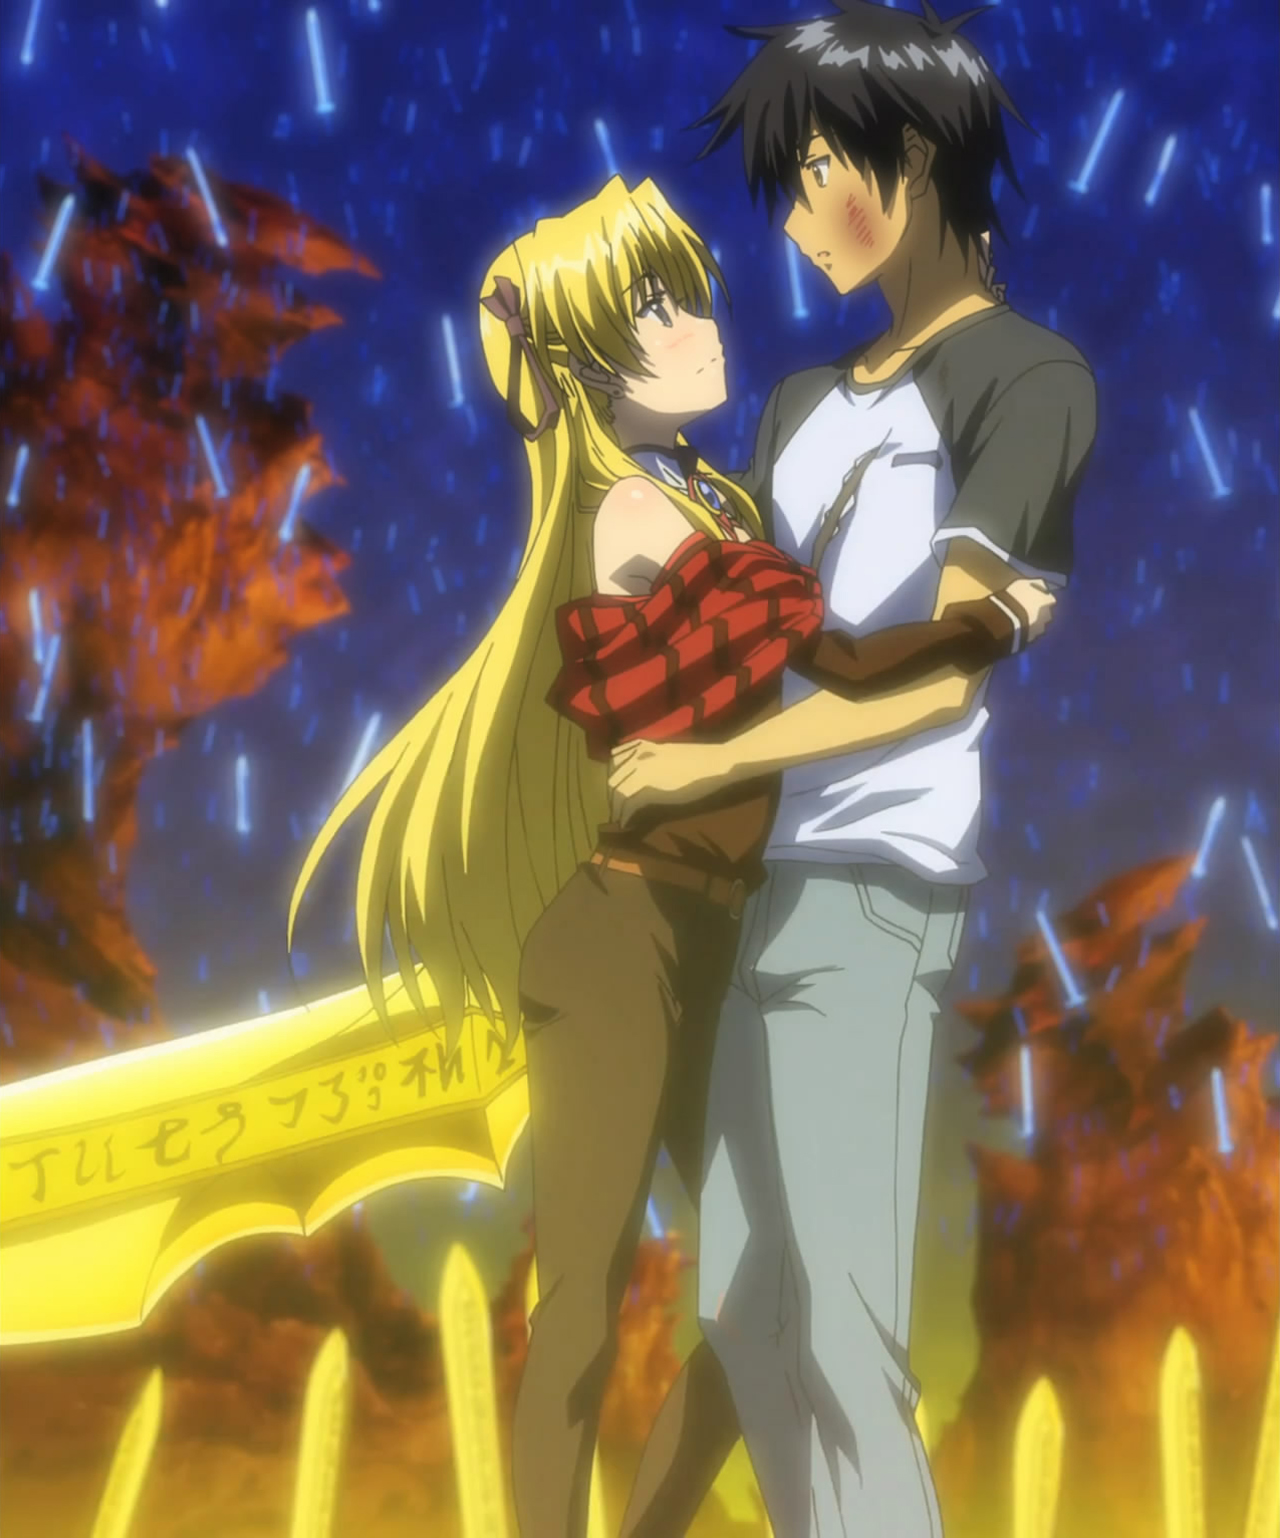 brandi scarbrough recommends best anime love scenes pic